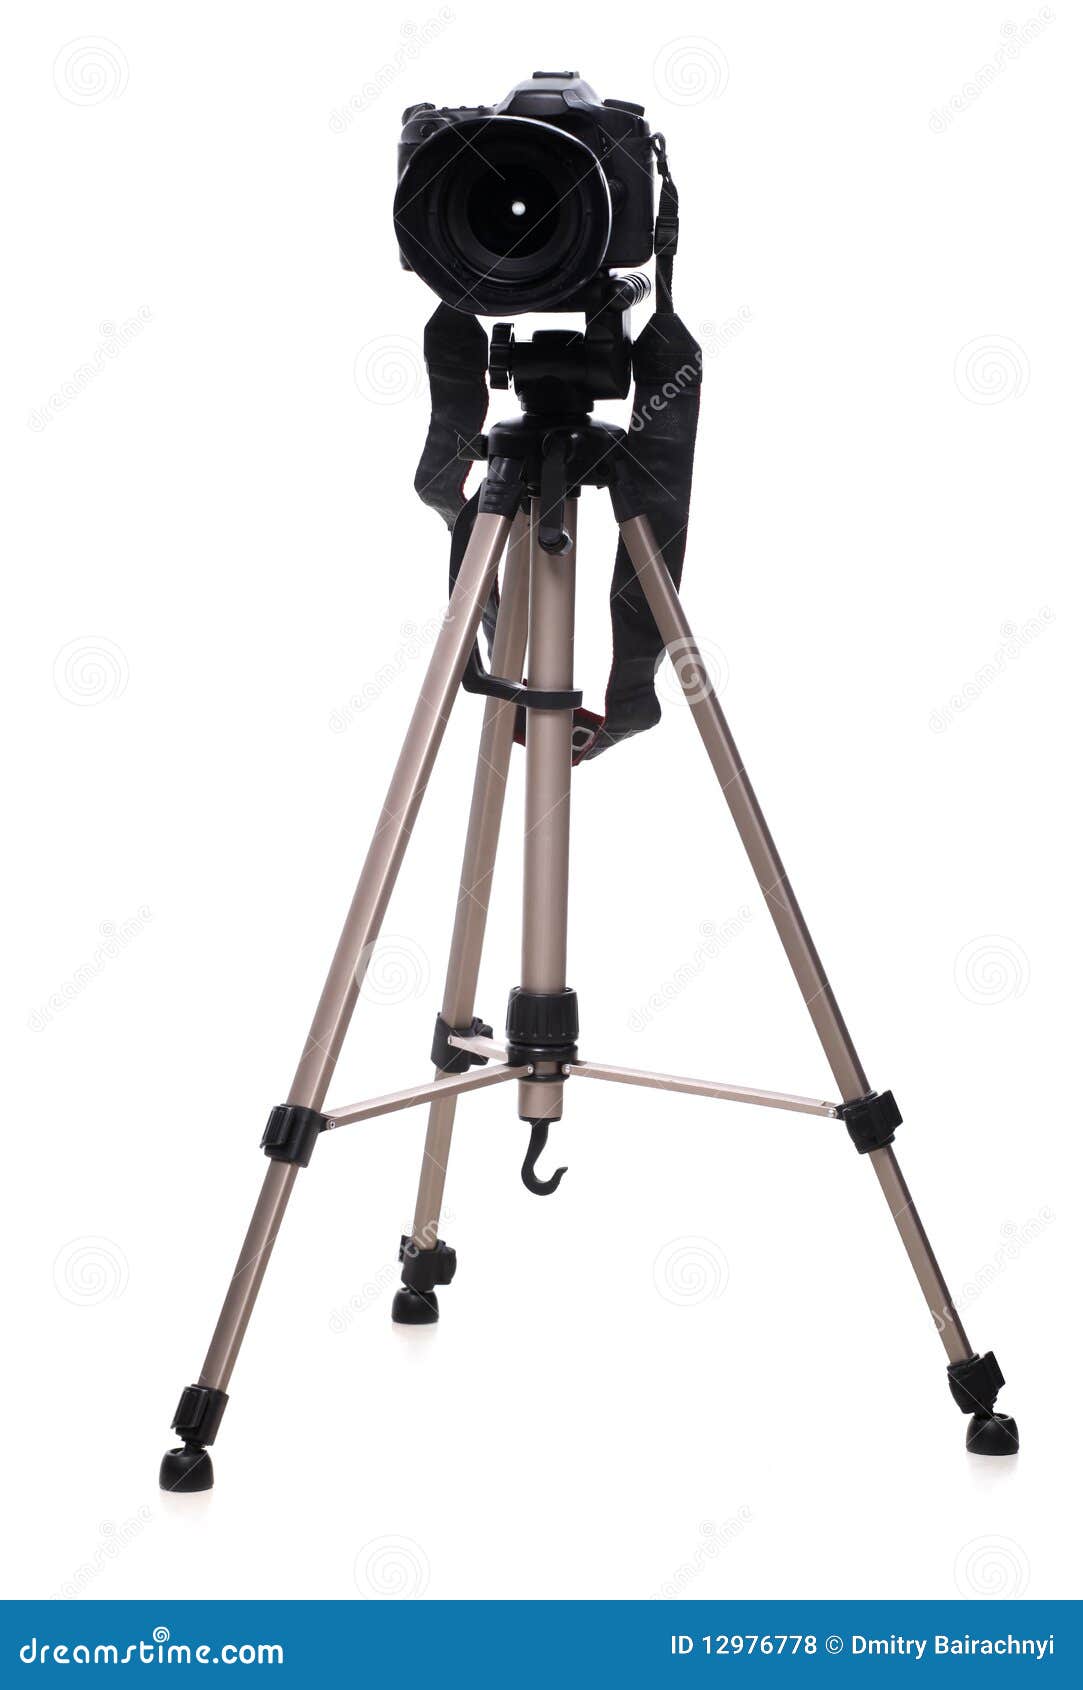 camera stand clipart - photo #42